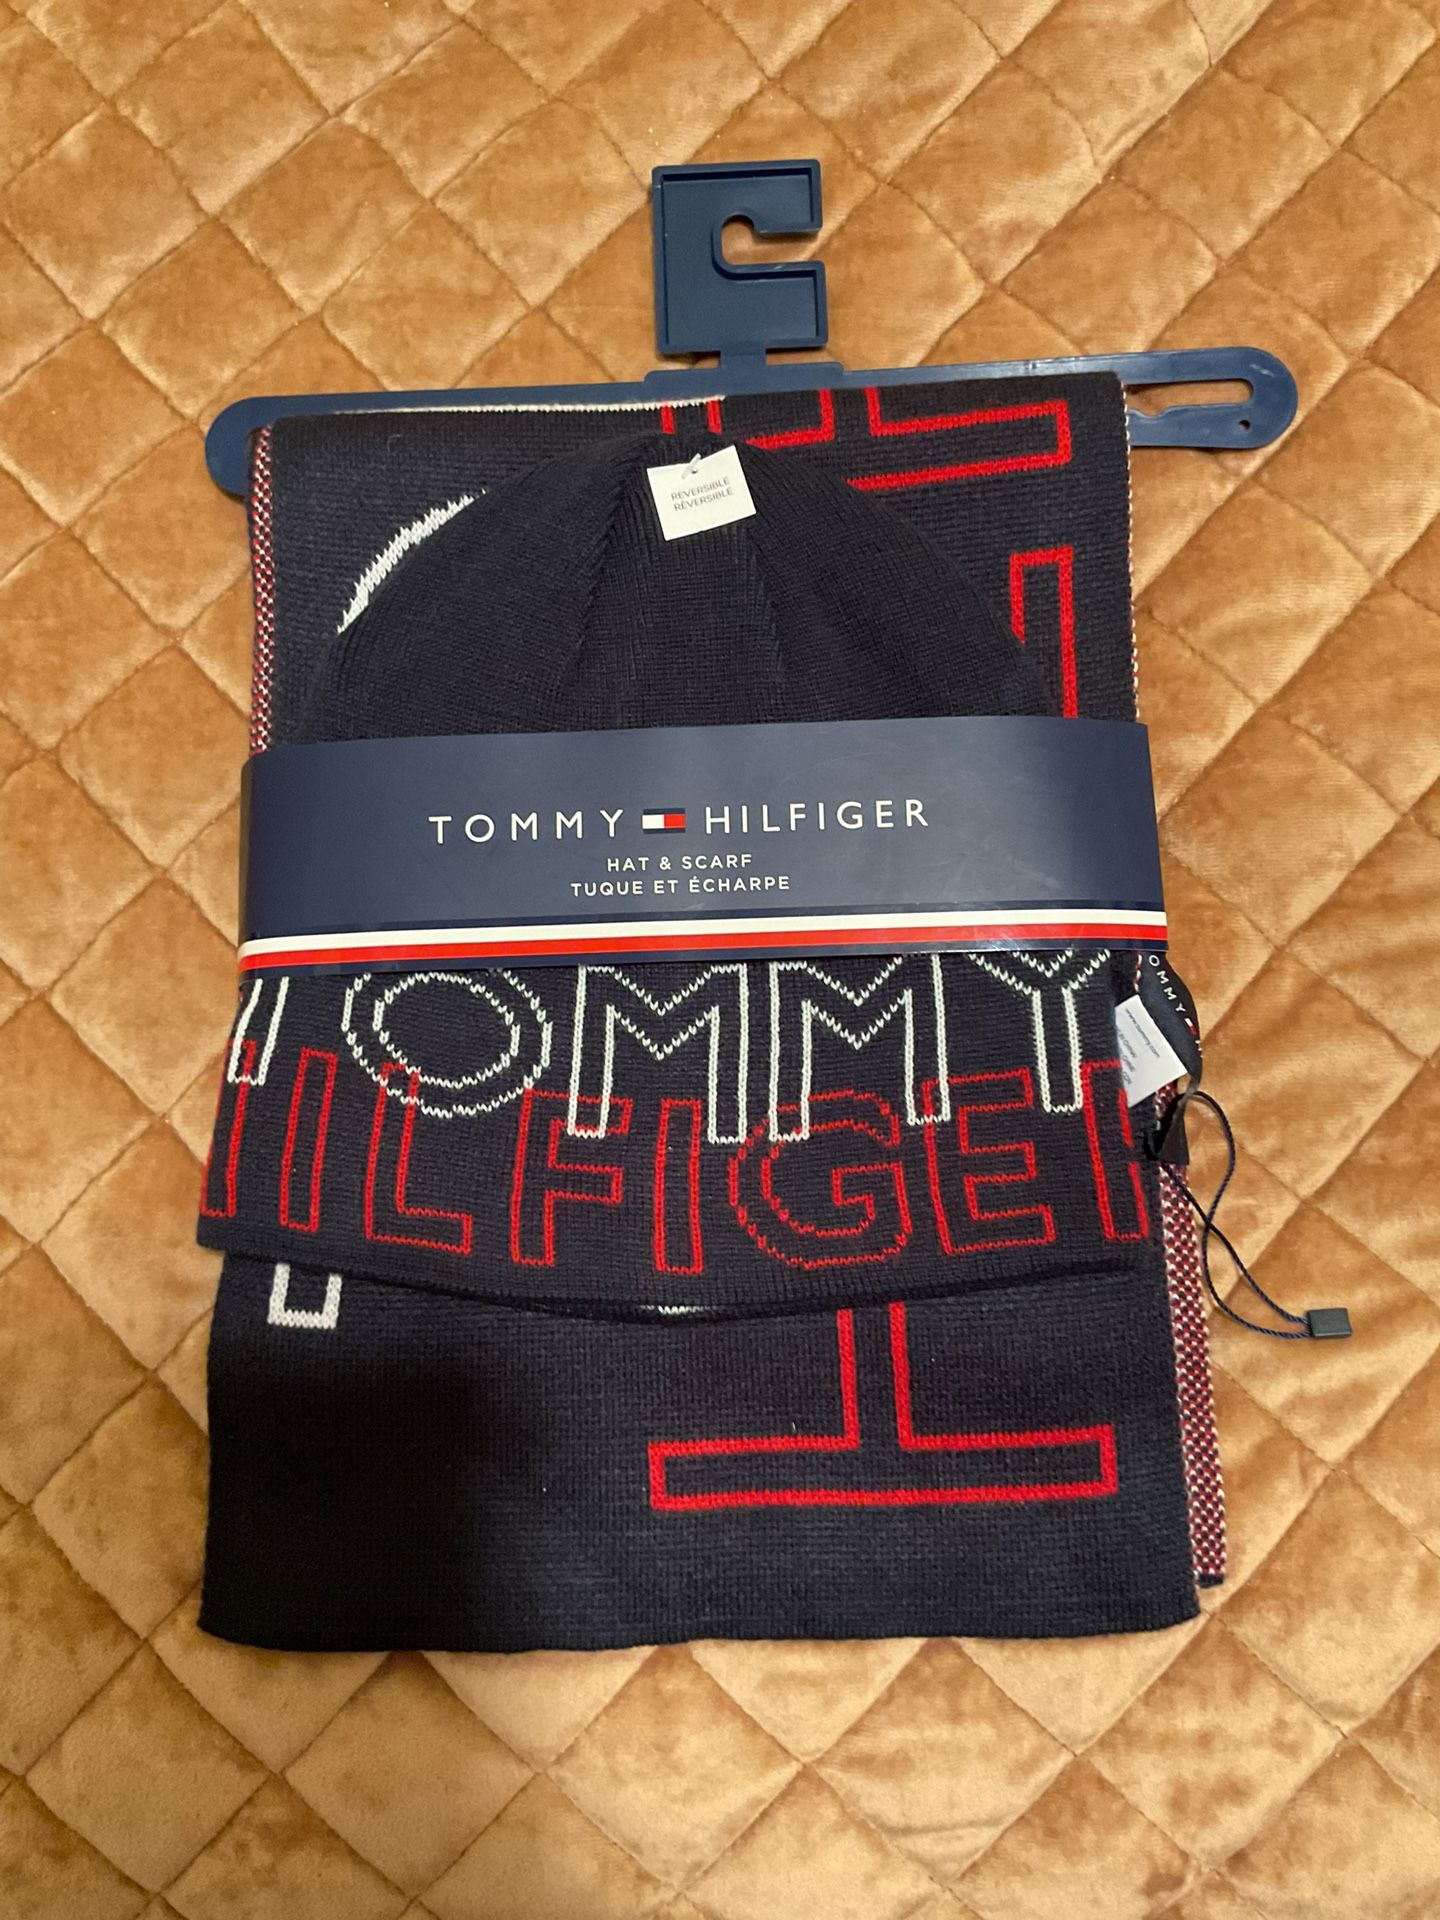 Navy blue reversible Tommy hilfiger hat and scarf set with red & white lettering NEW for Sale in Queens, NY -